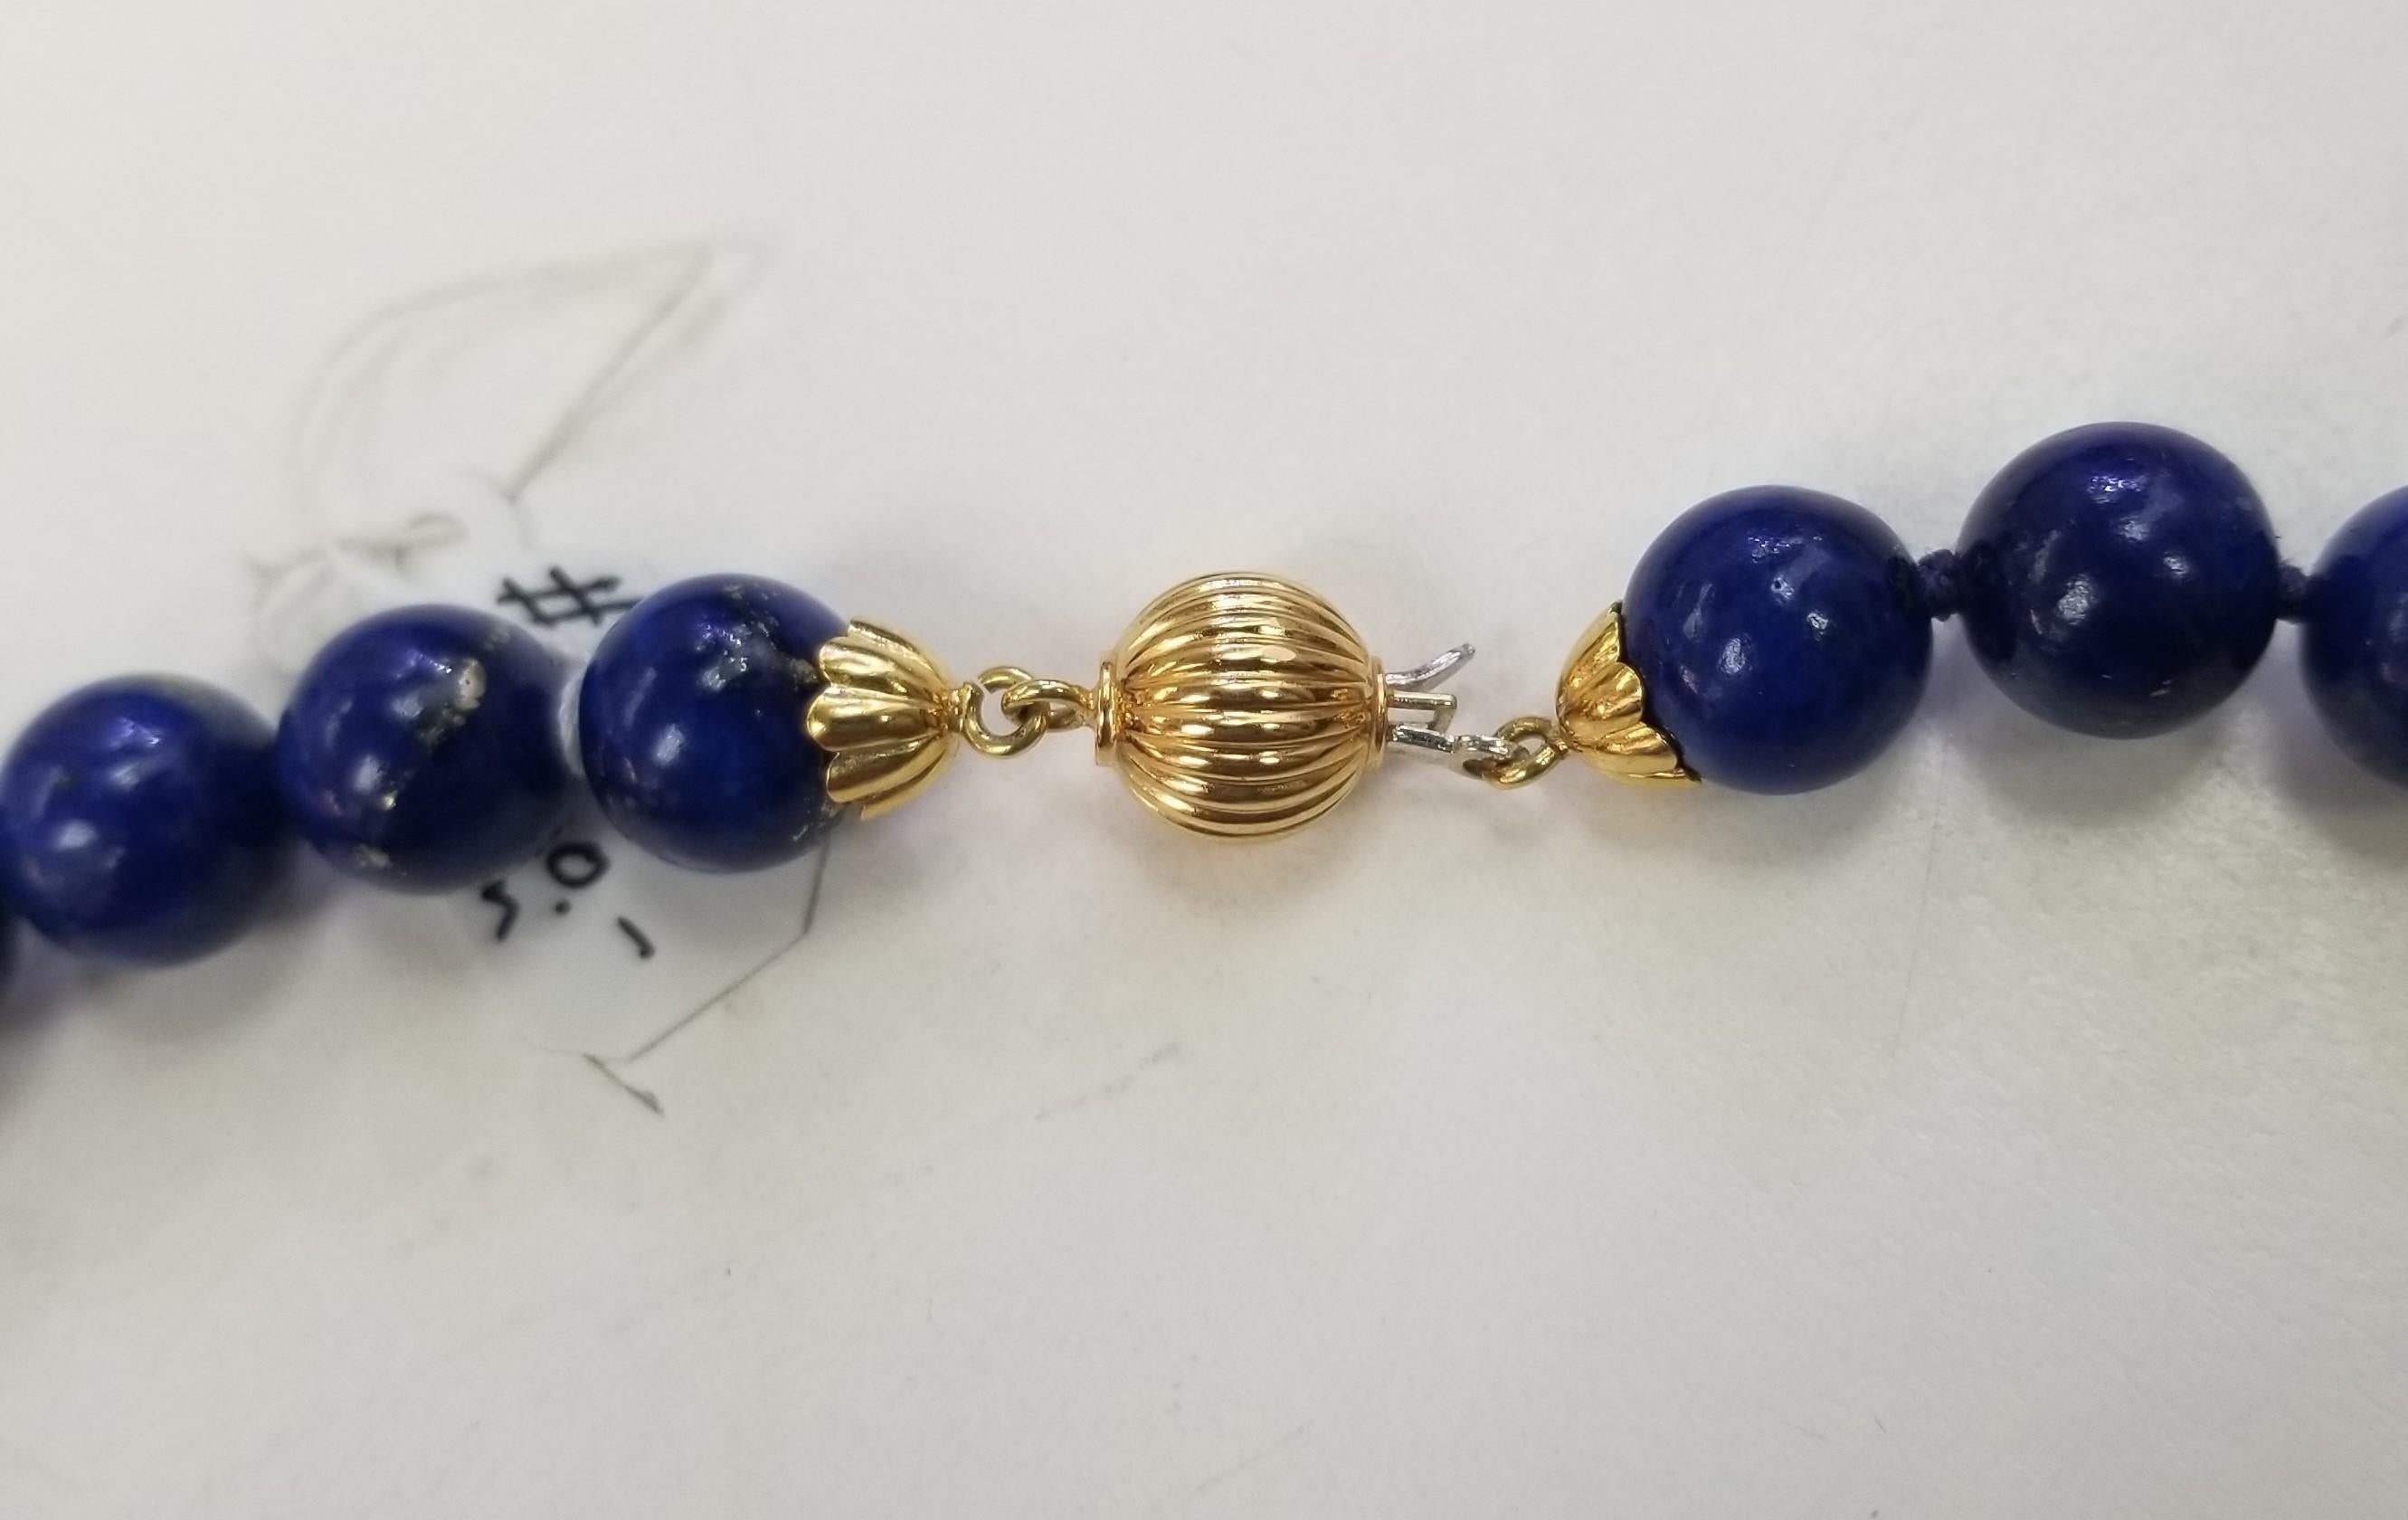 Women's or Men's Lapis Lazuli 9.5 - 10mm Beads with 14k yellow gold Rondelle Necklace 36 inches For Sale